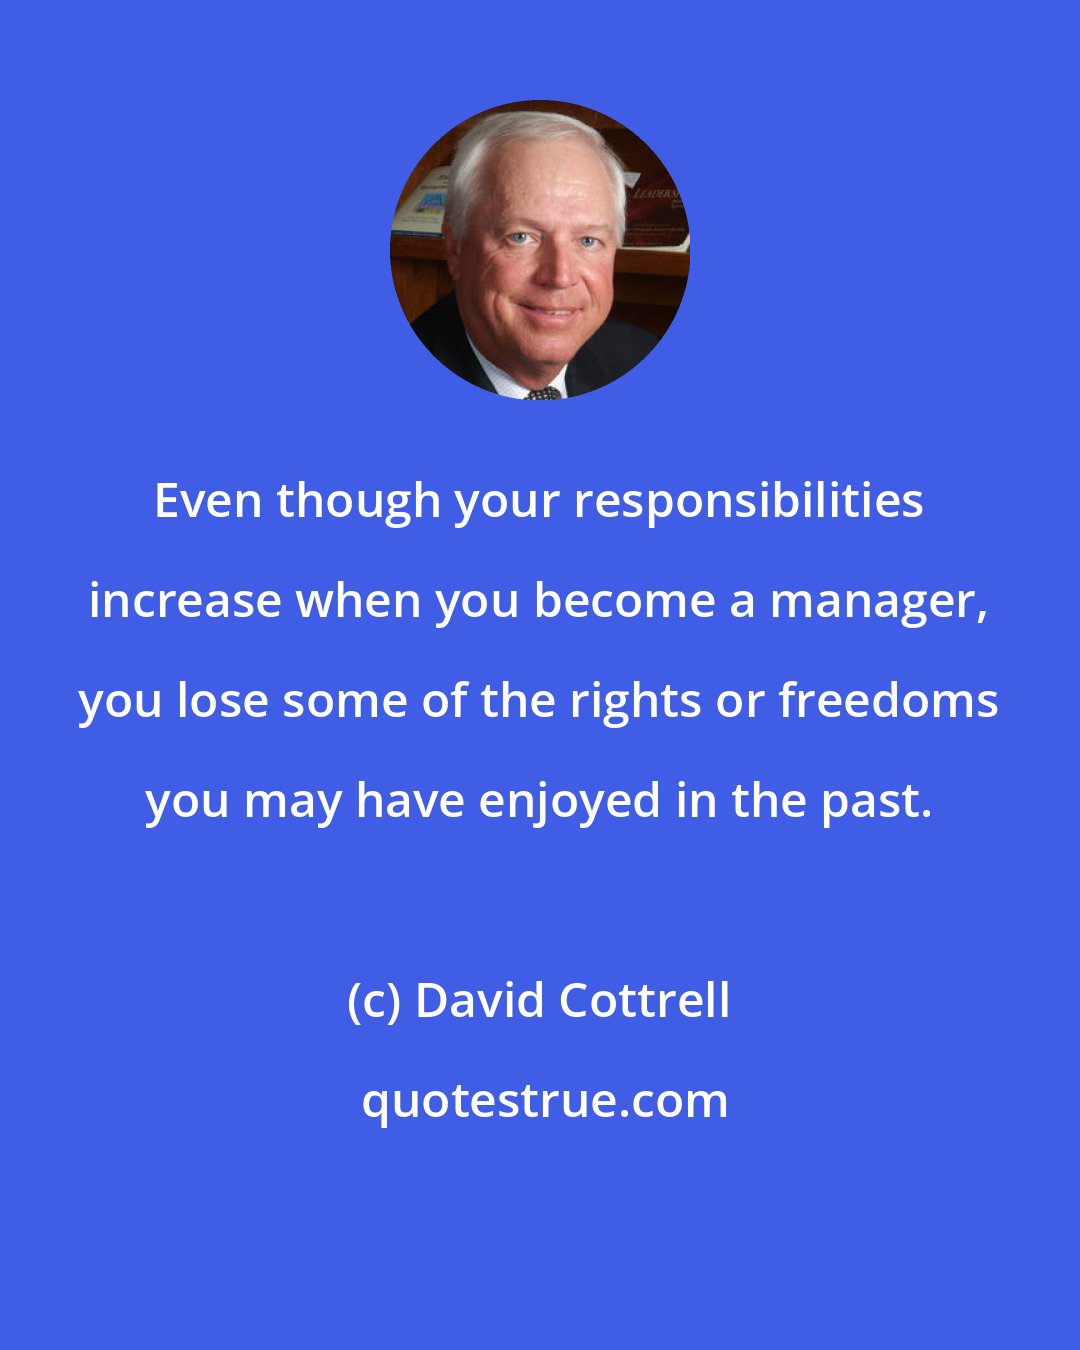 David Cottrell: Even though your responsibilities increase when you become a manager, you lose some of the rights or freedoms you may have enjoyed in the past.